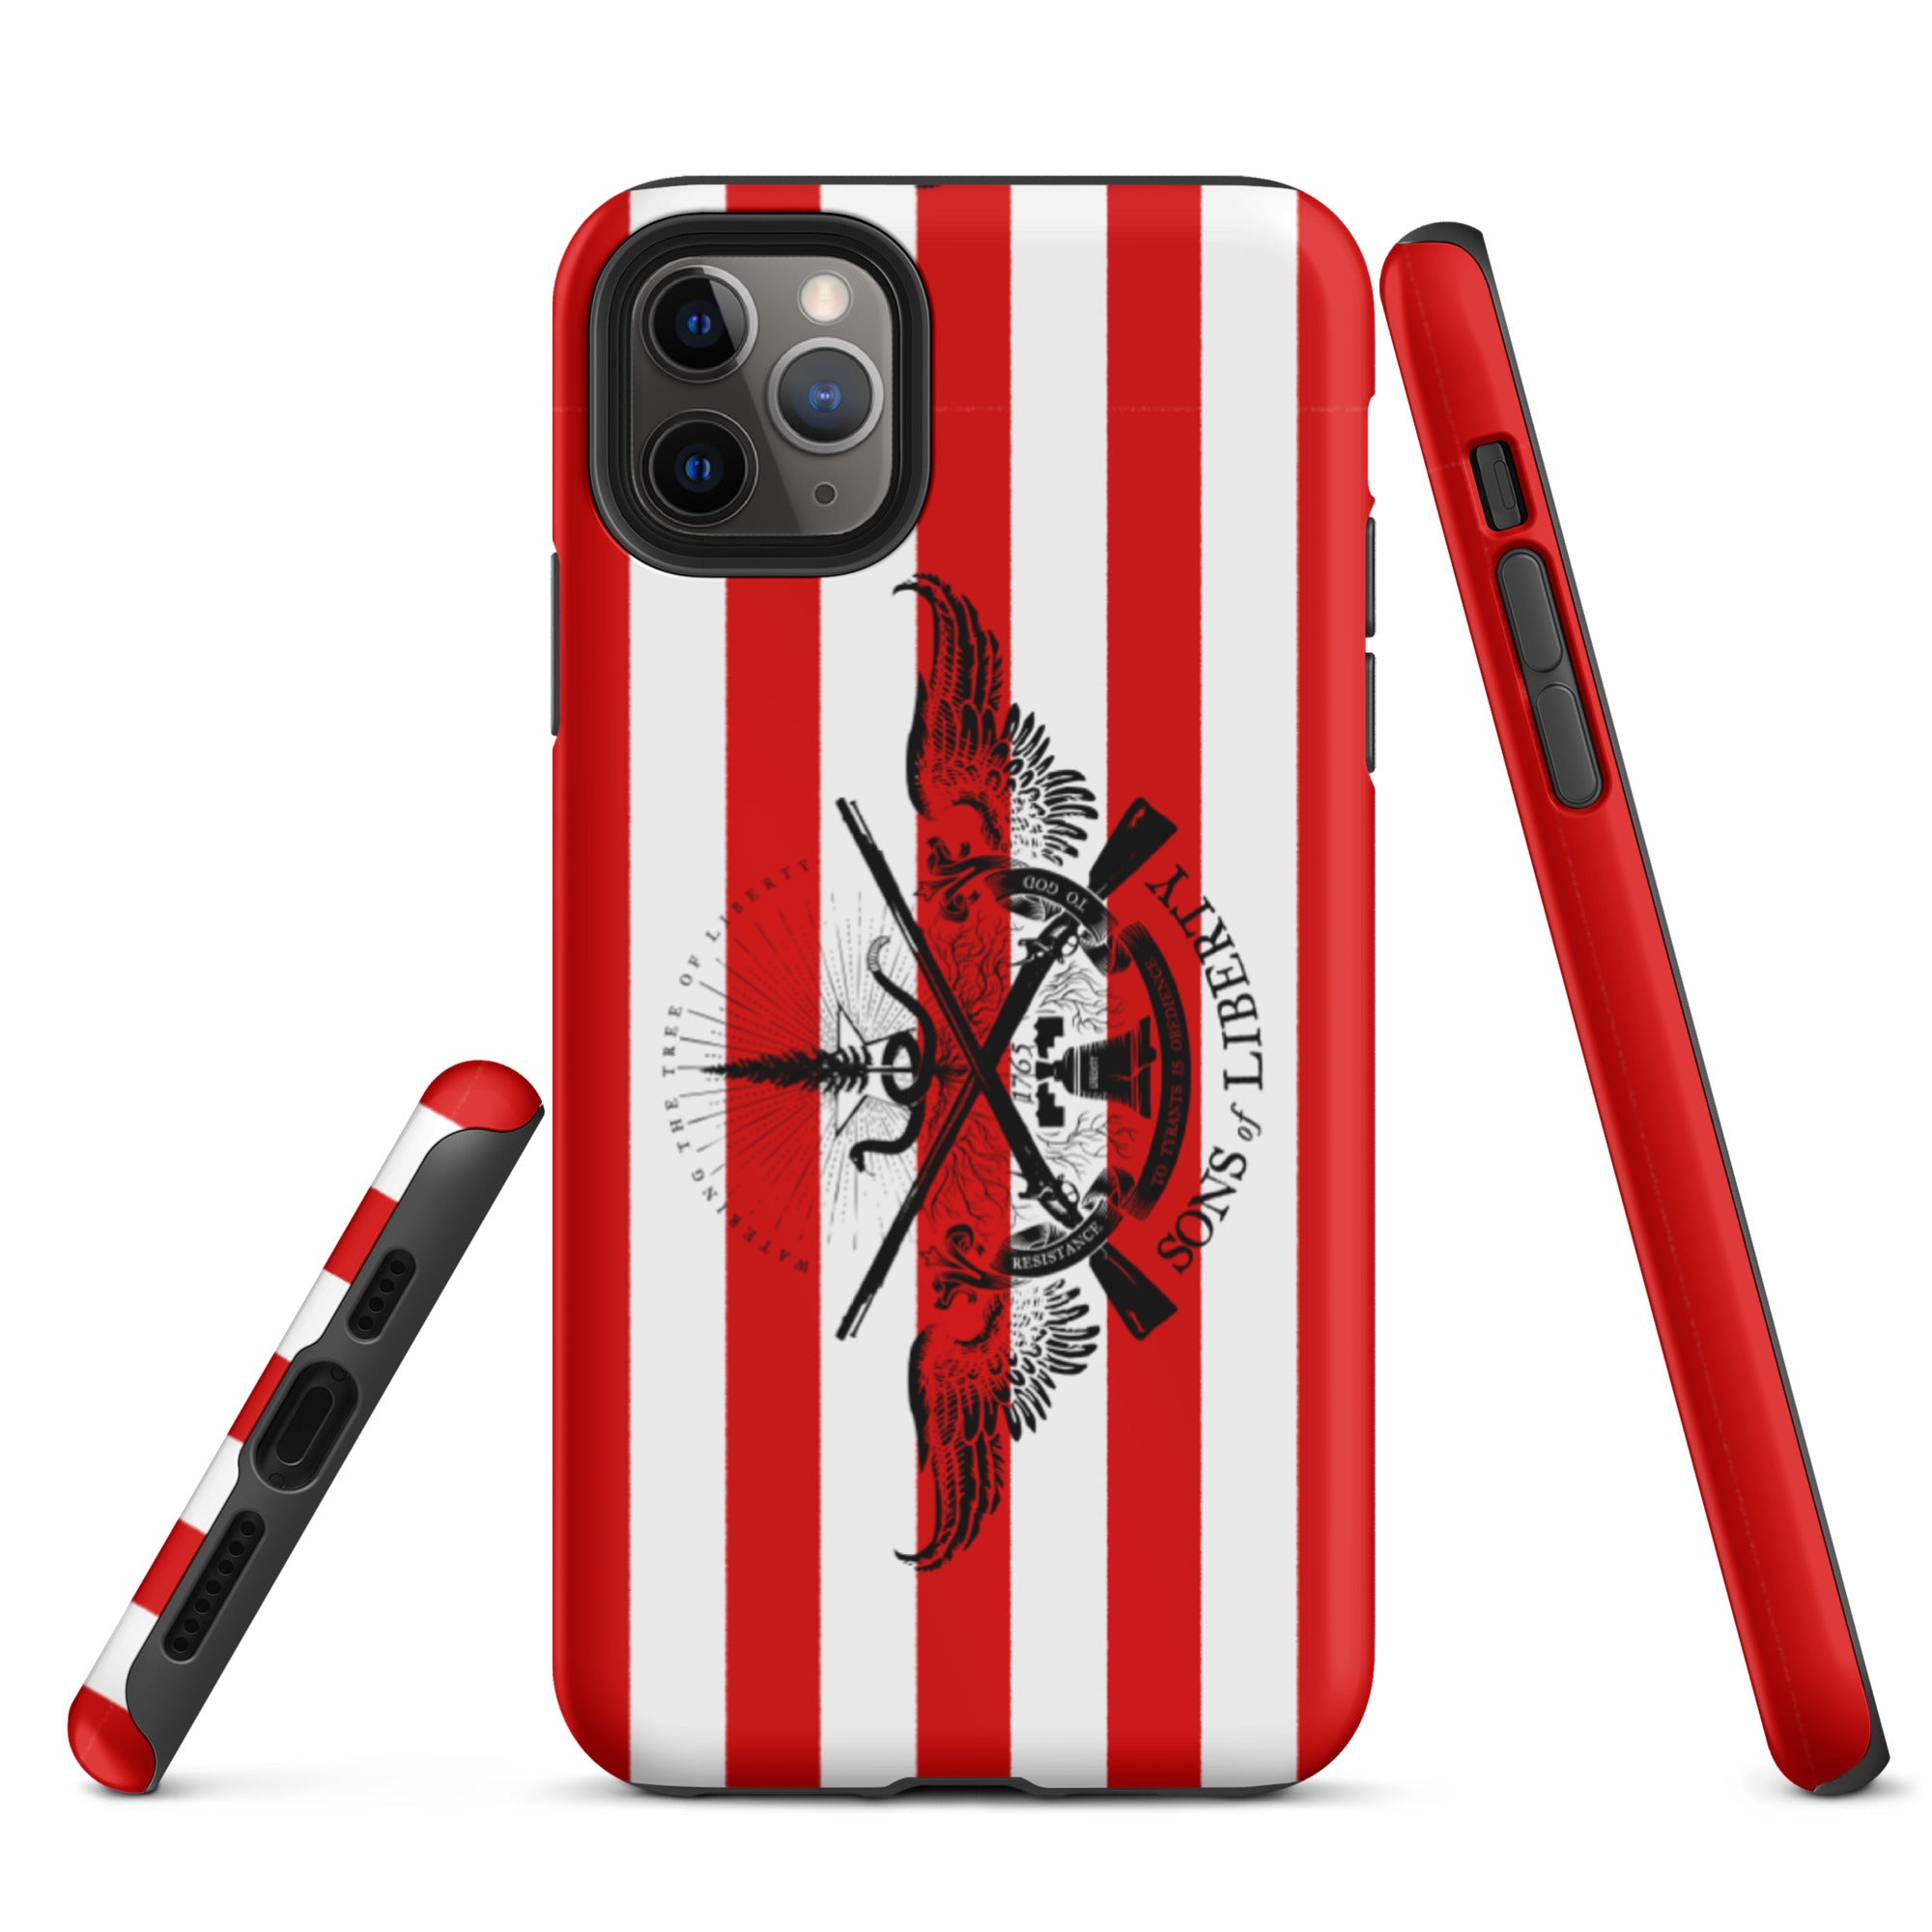 Sons of Liberty Tough iPhone case